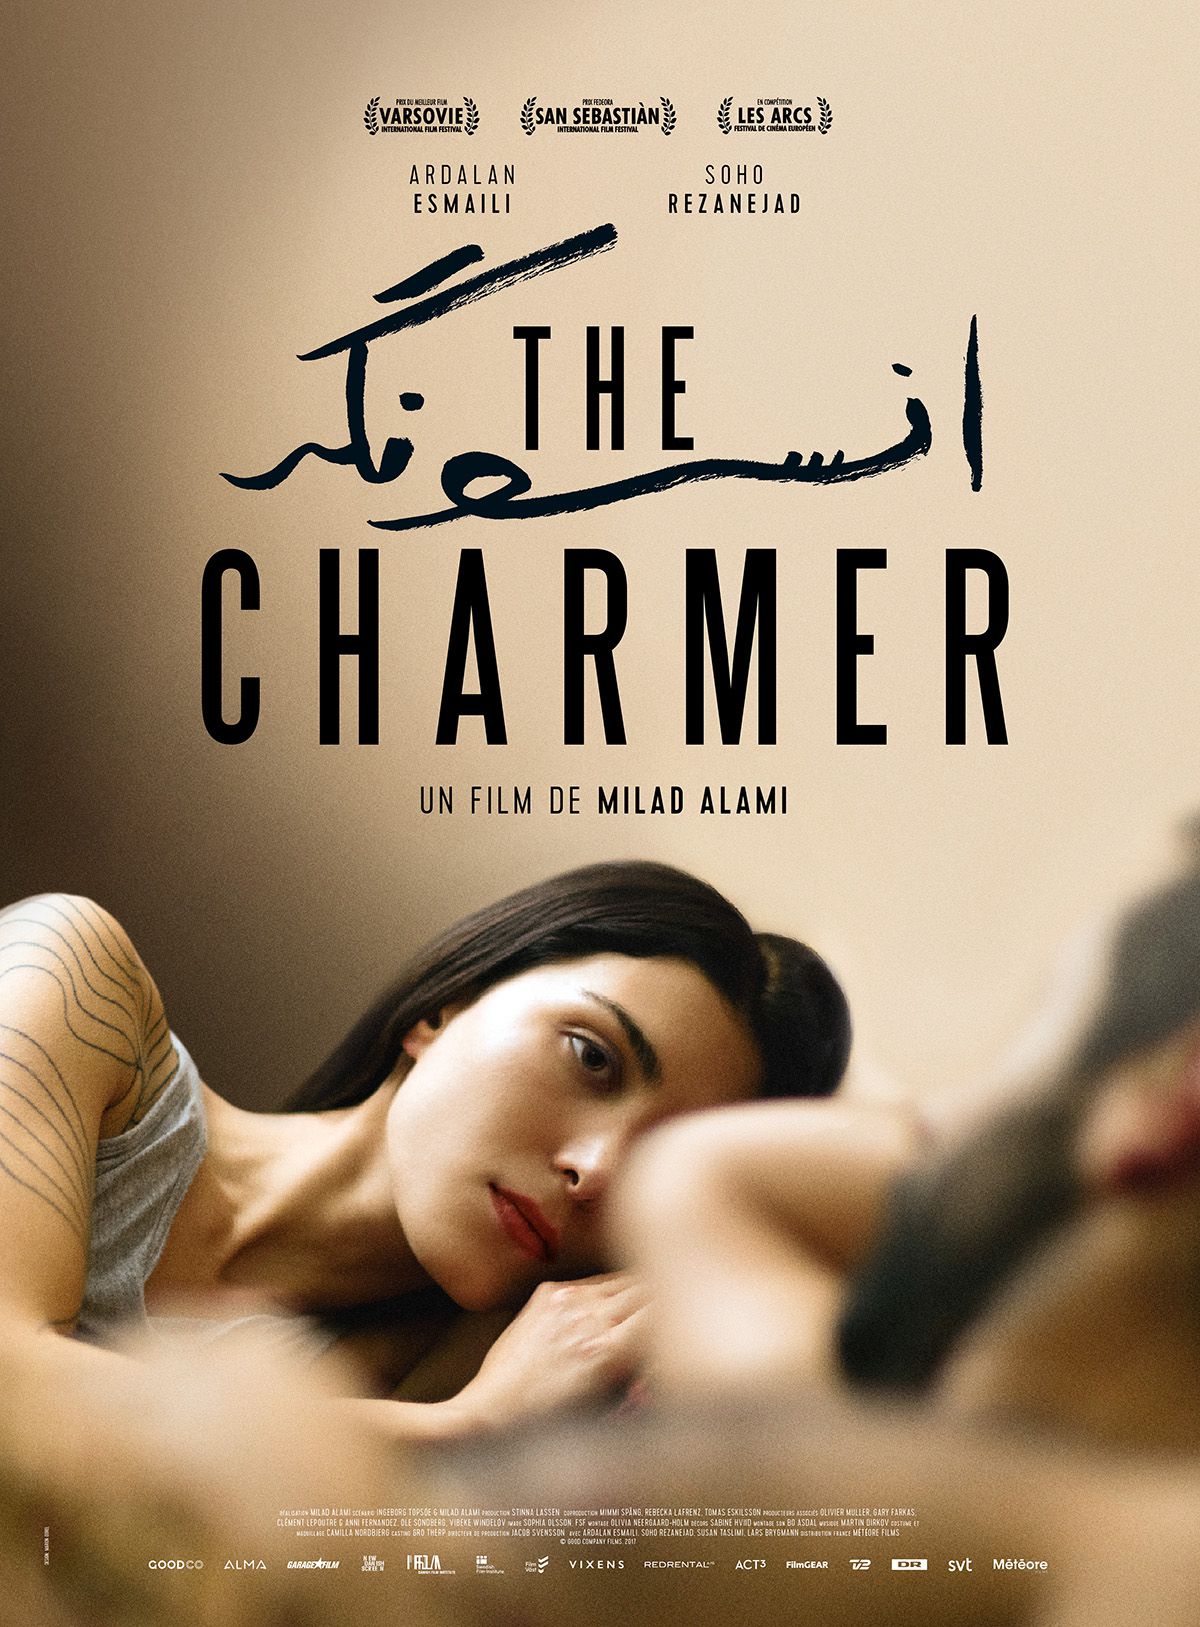 The Charmer - Film (2018) streaming VF gratuit complet